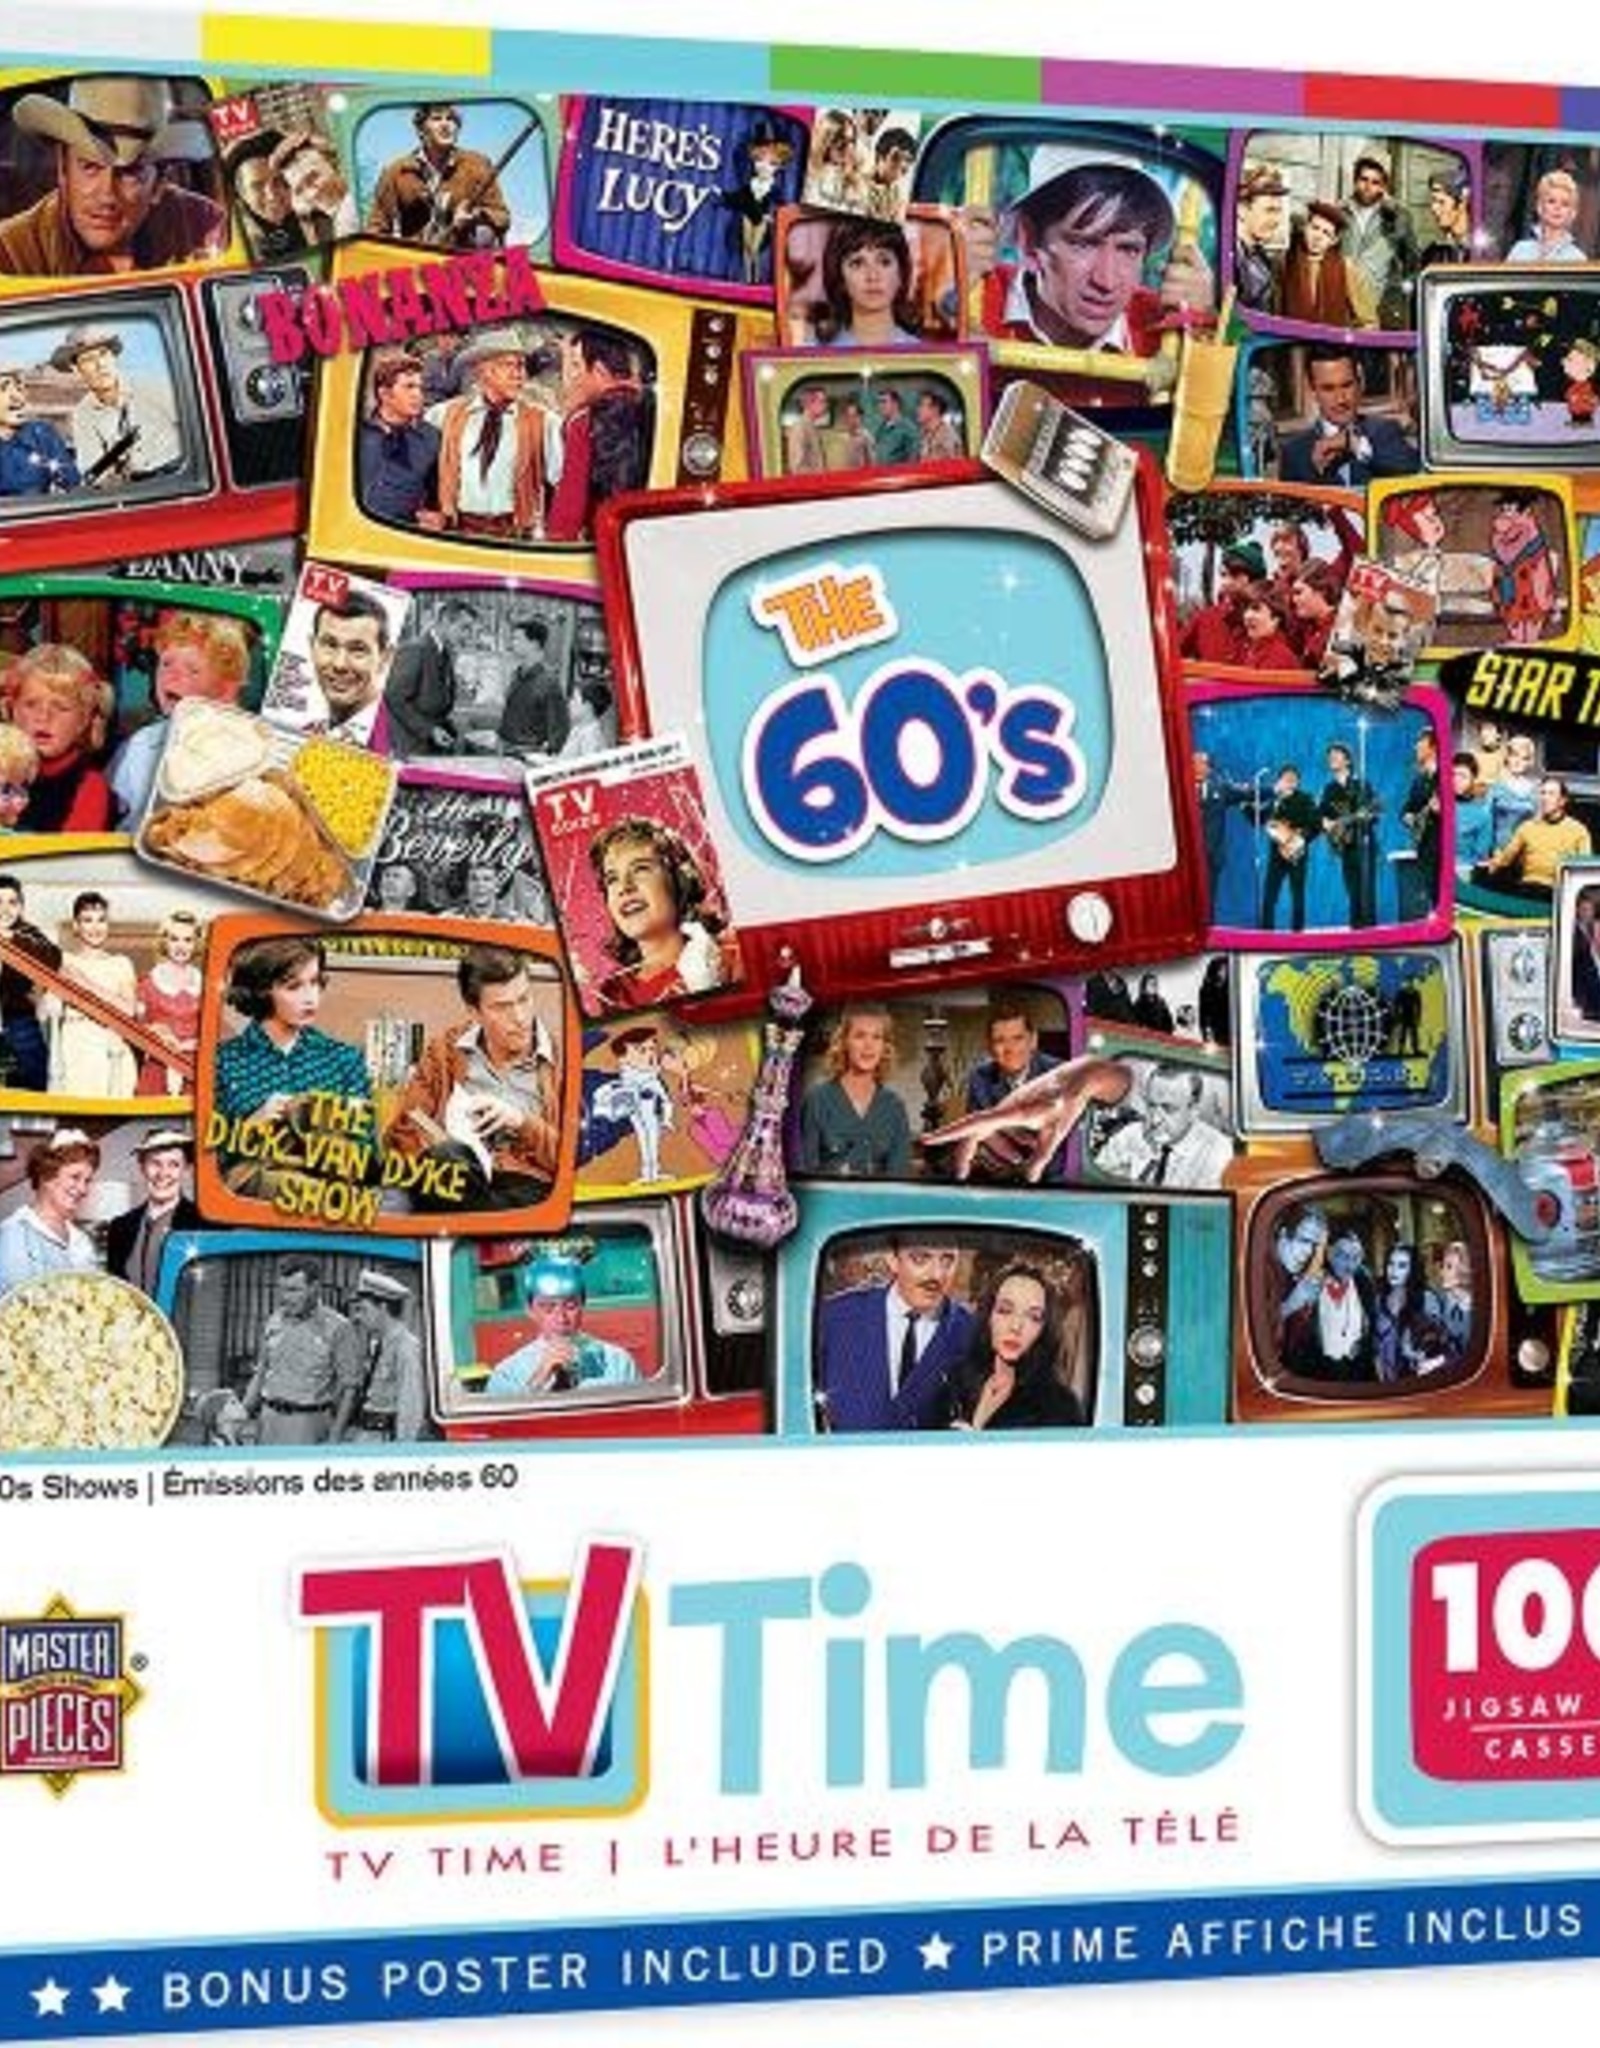 Master Pieces 1000pc TV Time - 60s Shows